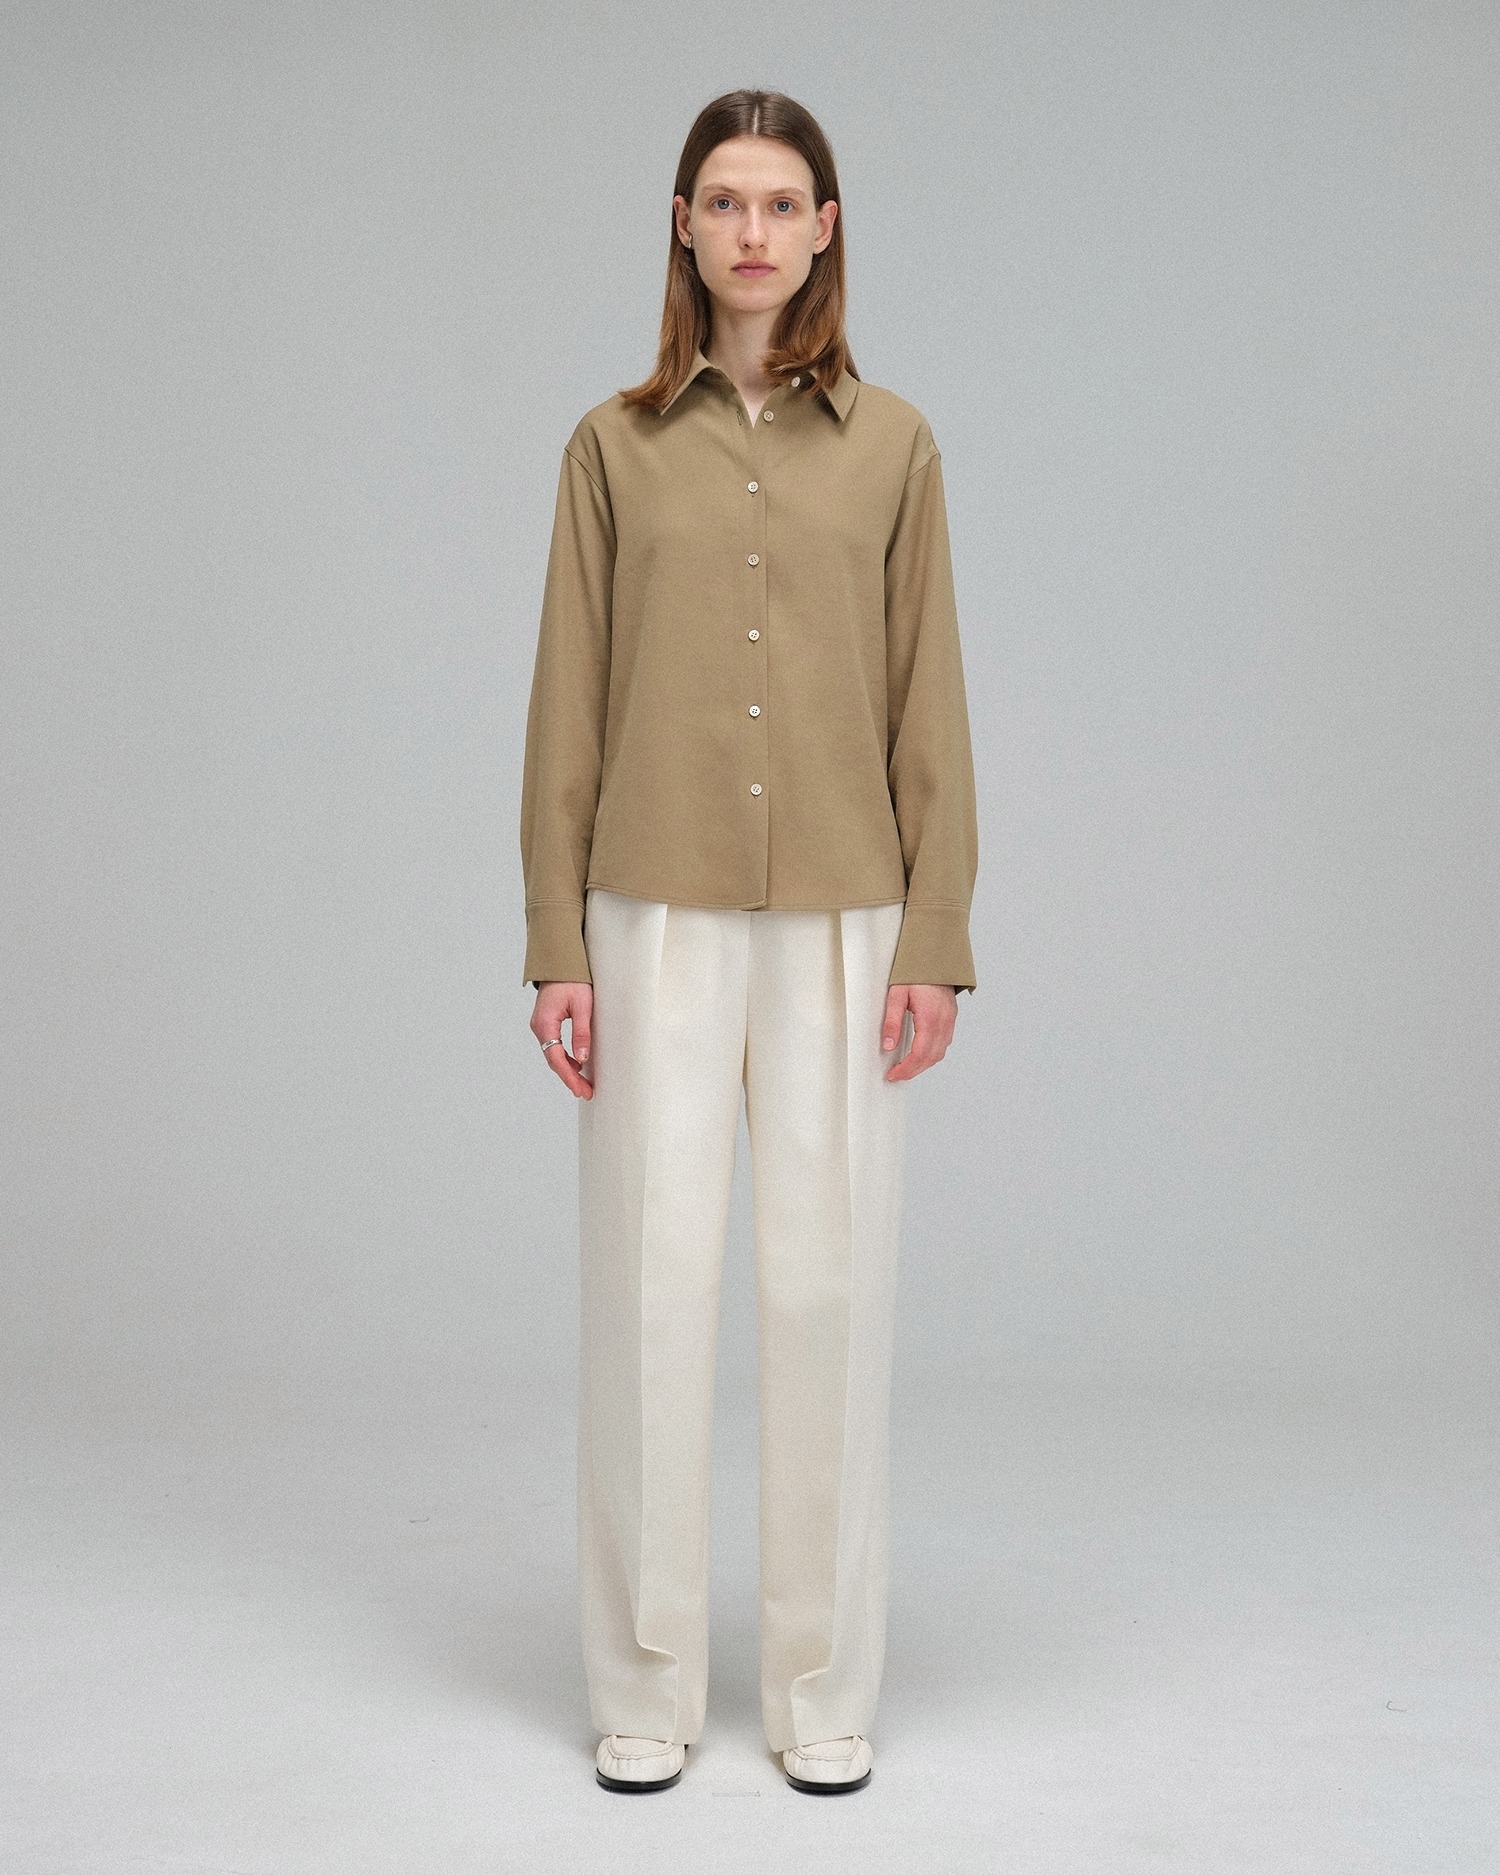 Relaxed Fluid Shirts - Beige